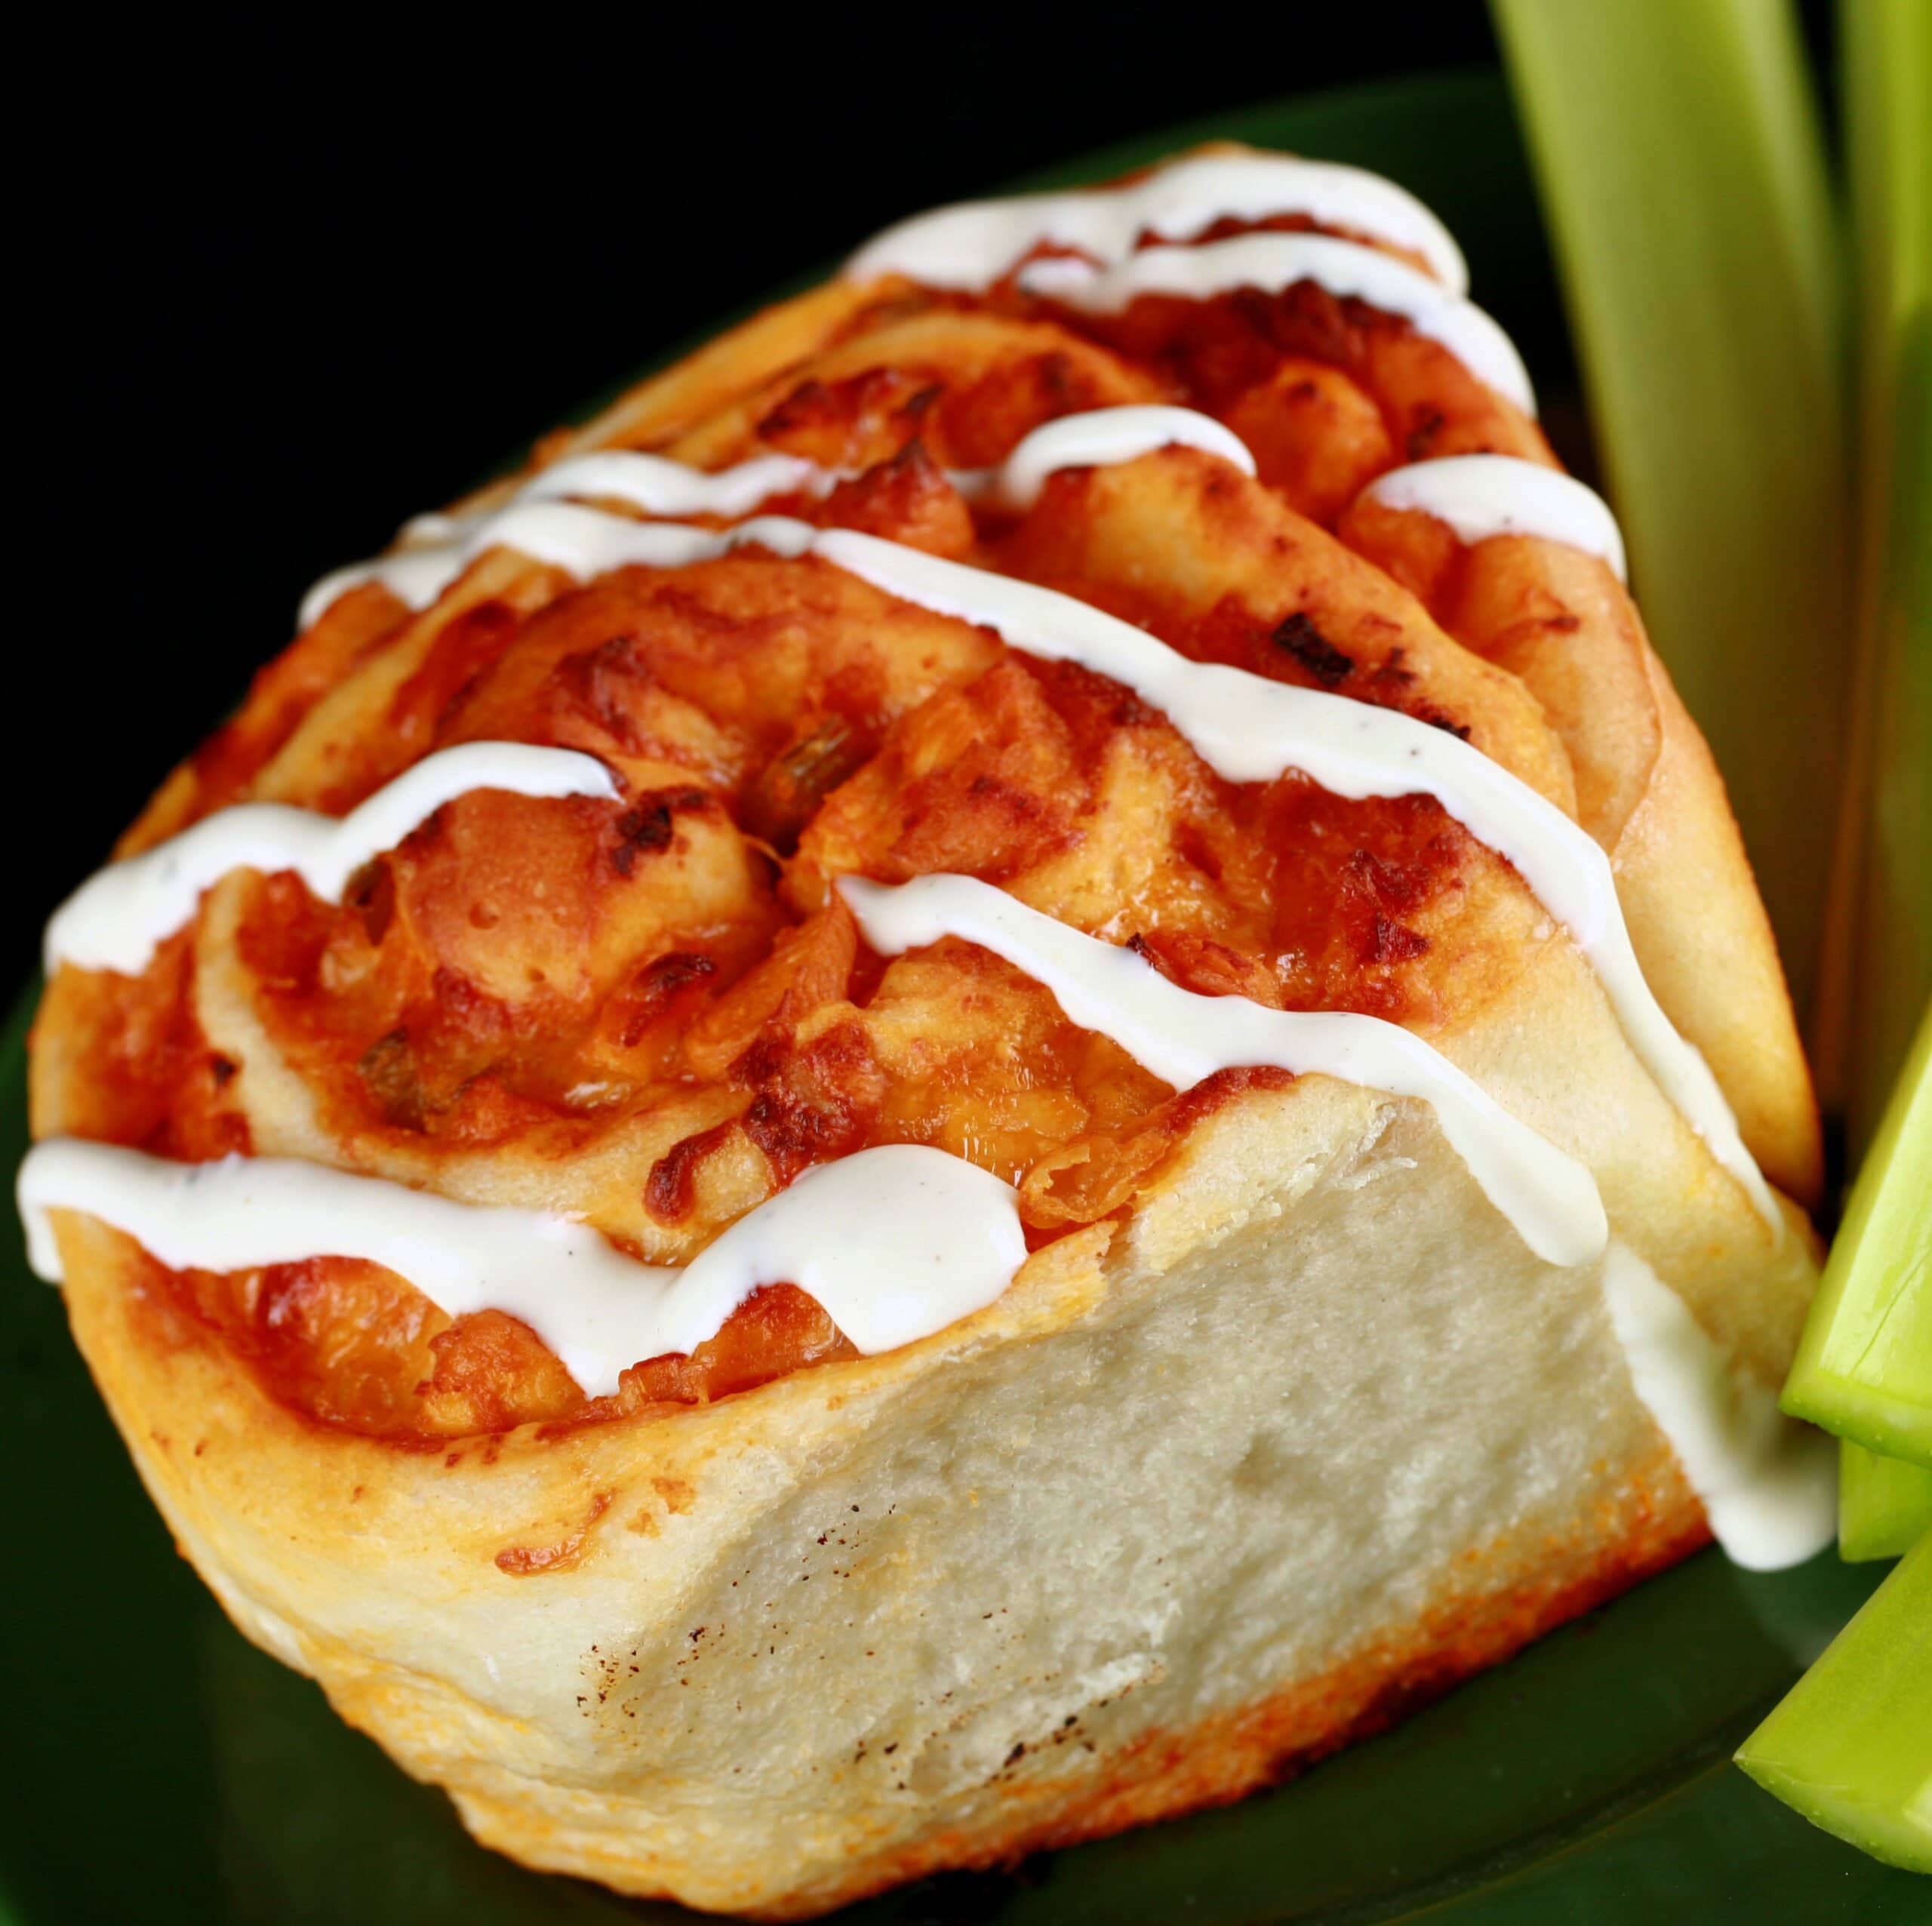 A close up photo of a buffalo chicken roll - like a cinnamon bun, but with a buffalo chicken filling instead. It is drizzled with ranch dressing, and has celery sticks on the side.